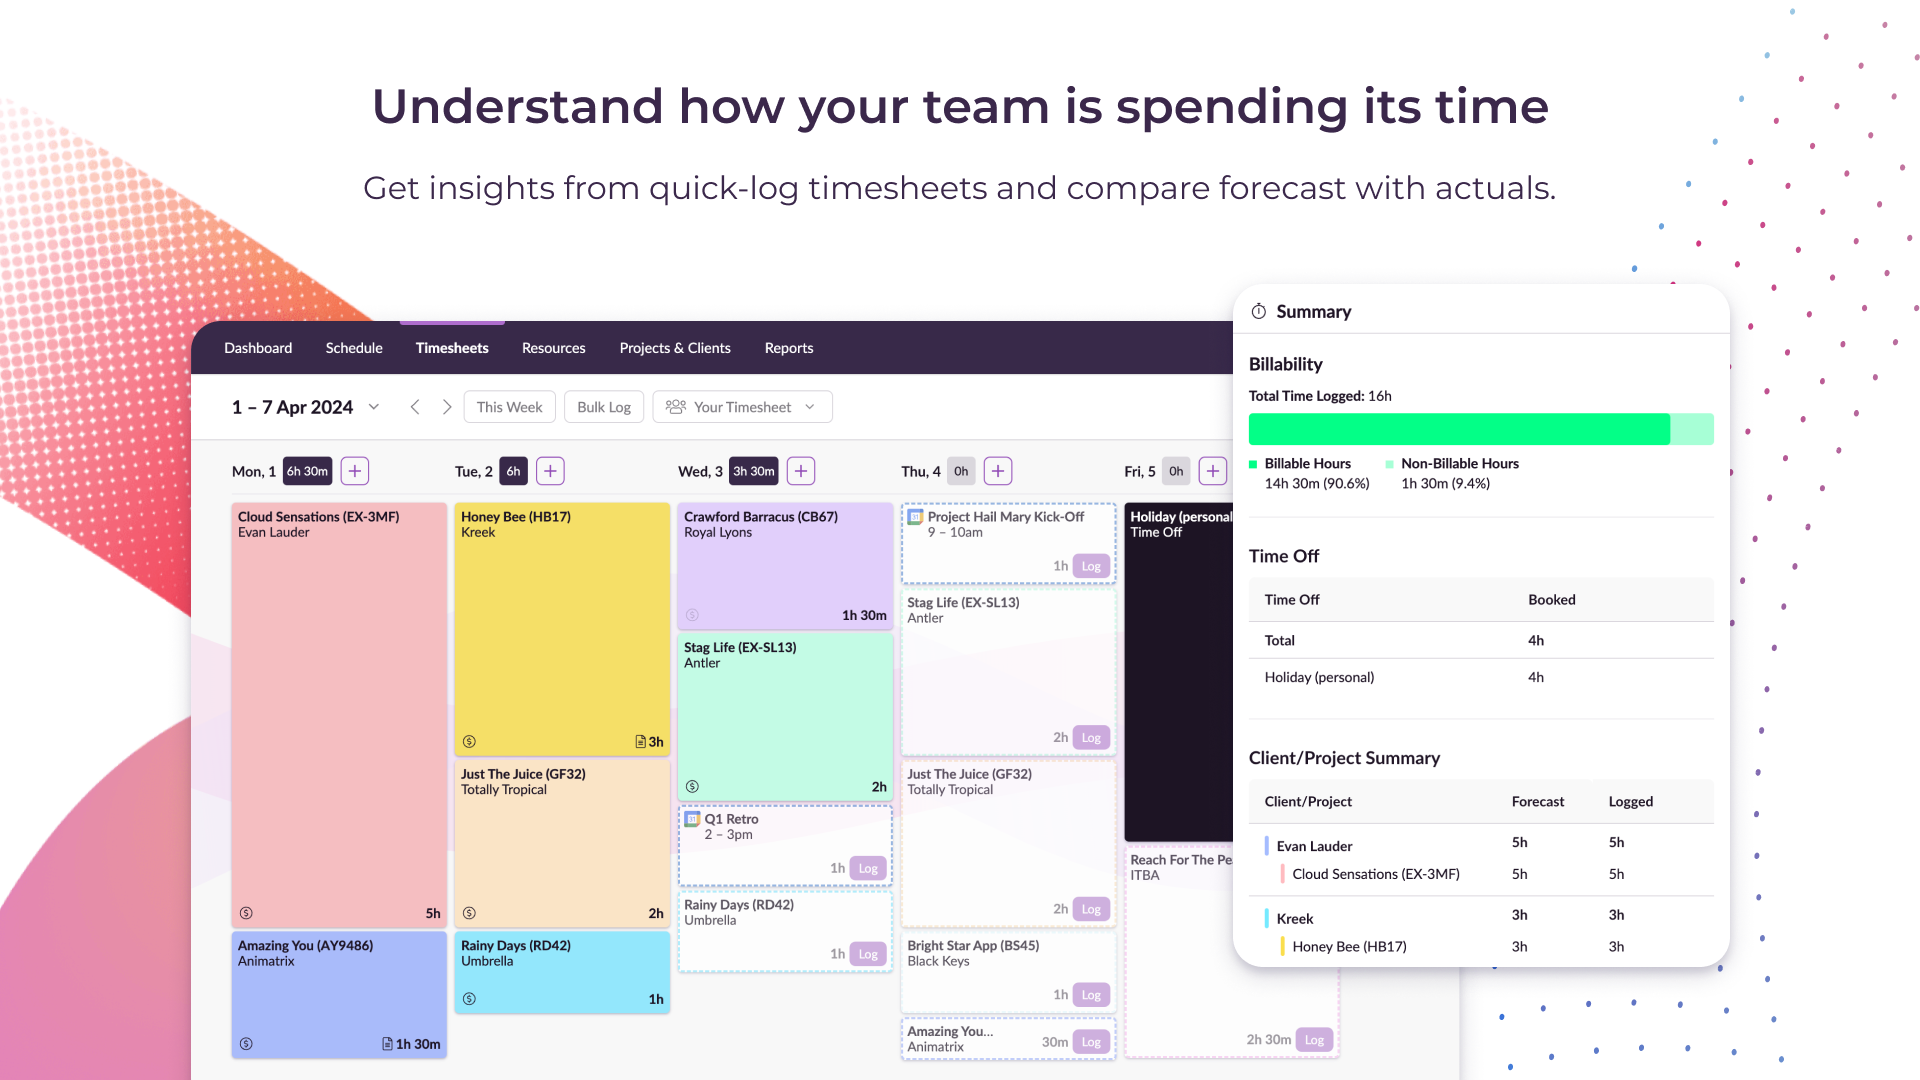 Understand how your team is spending its time. Get insights from quick-log timesheets and compare forecast with actuals.